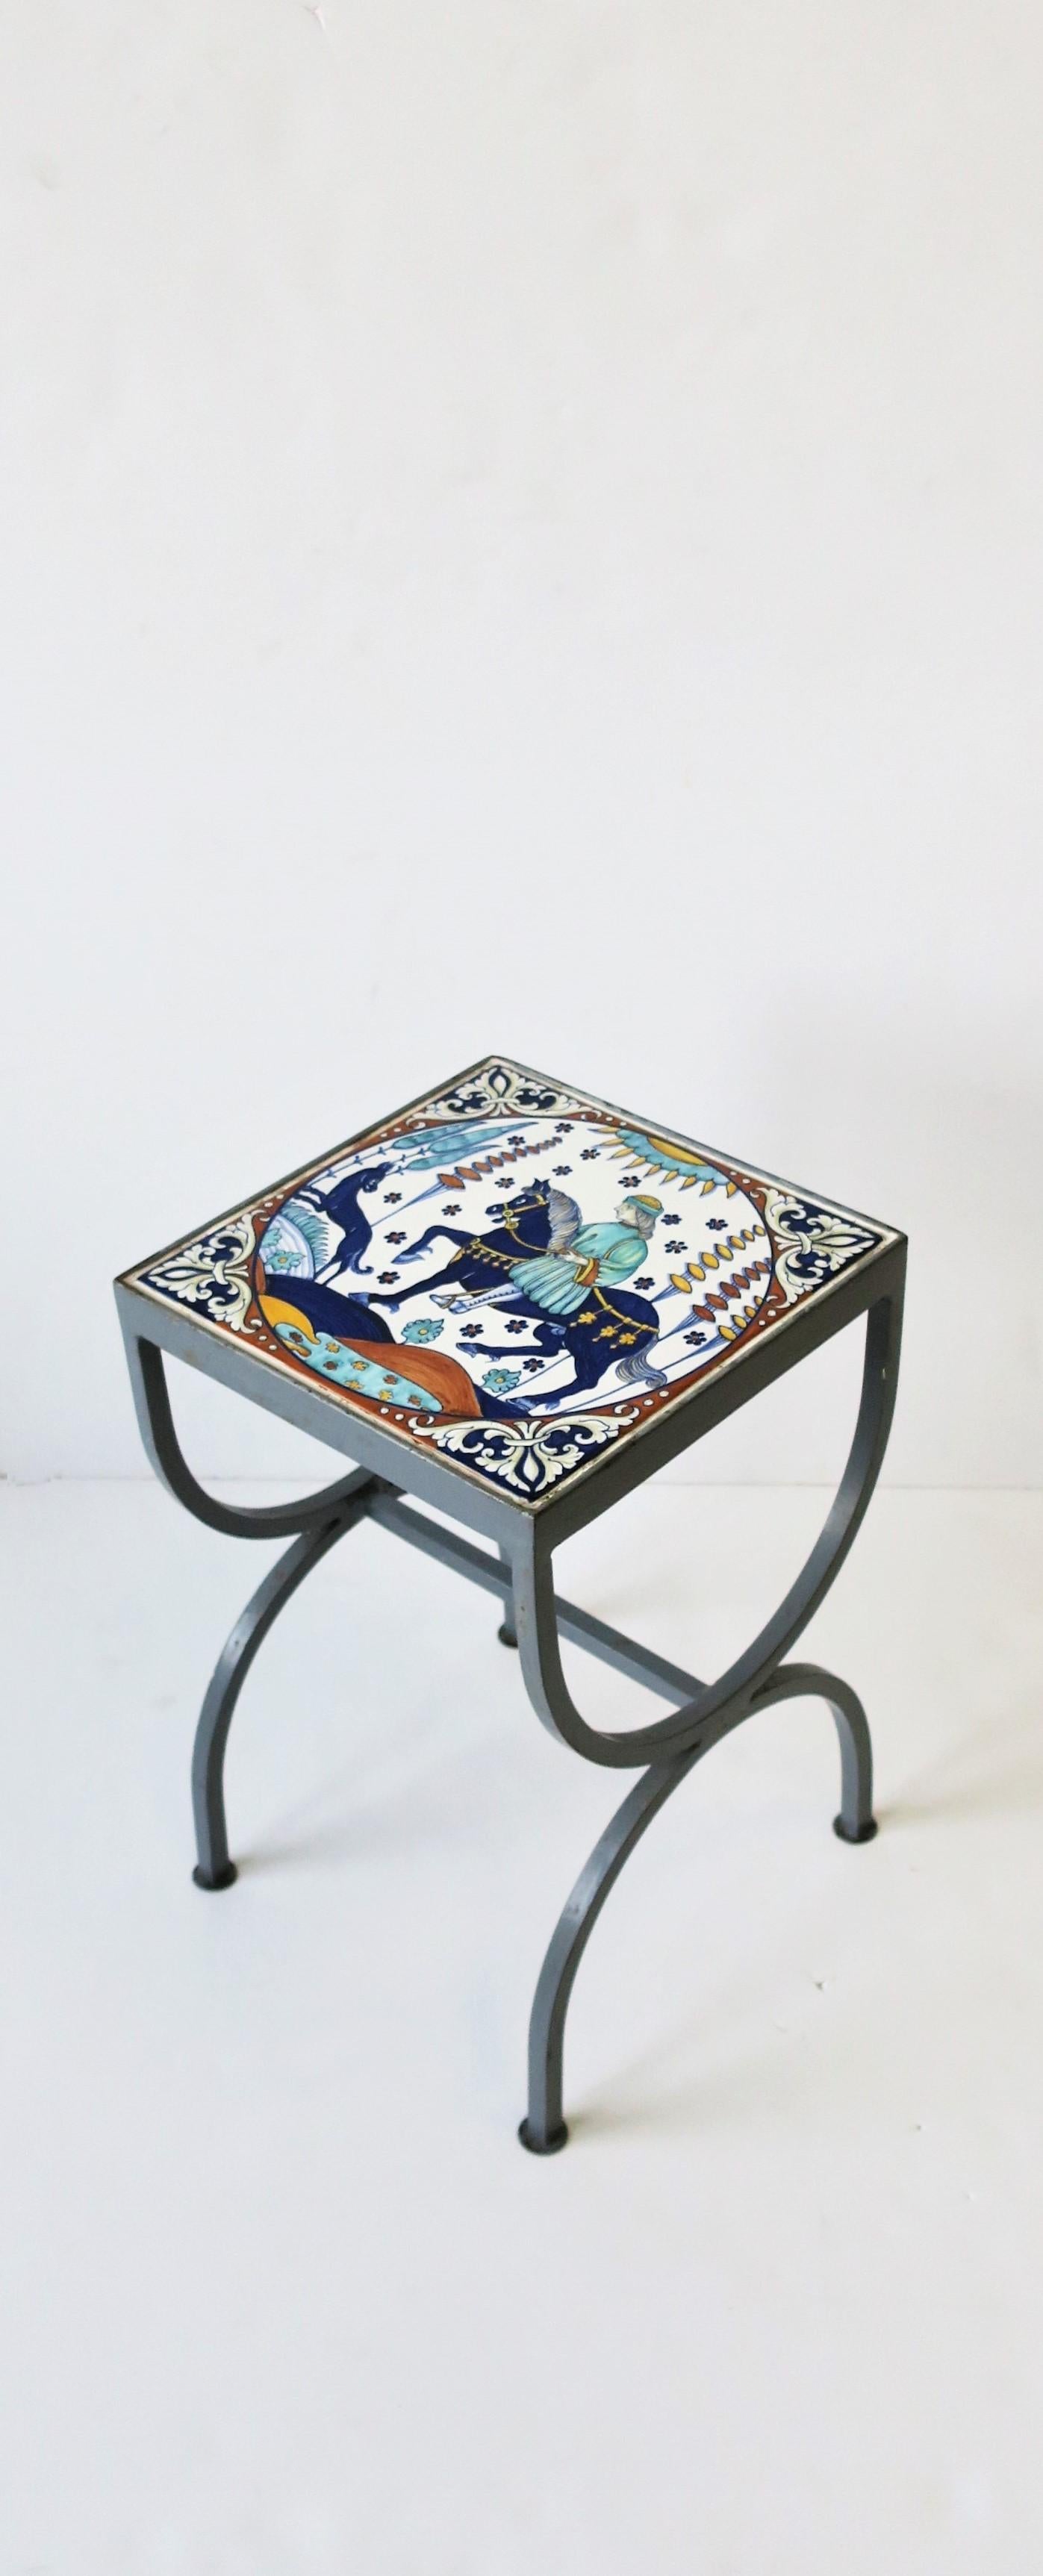 metal table with tile top